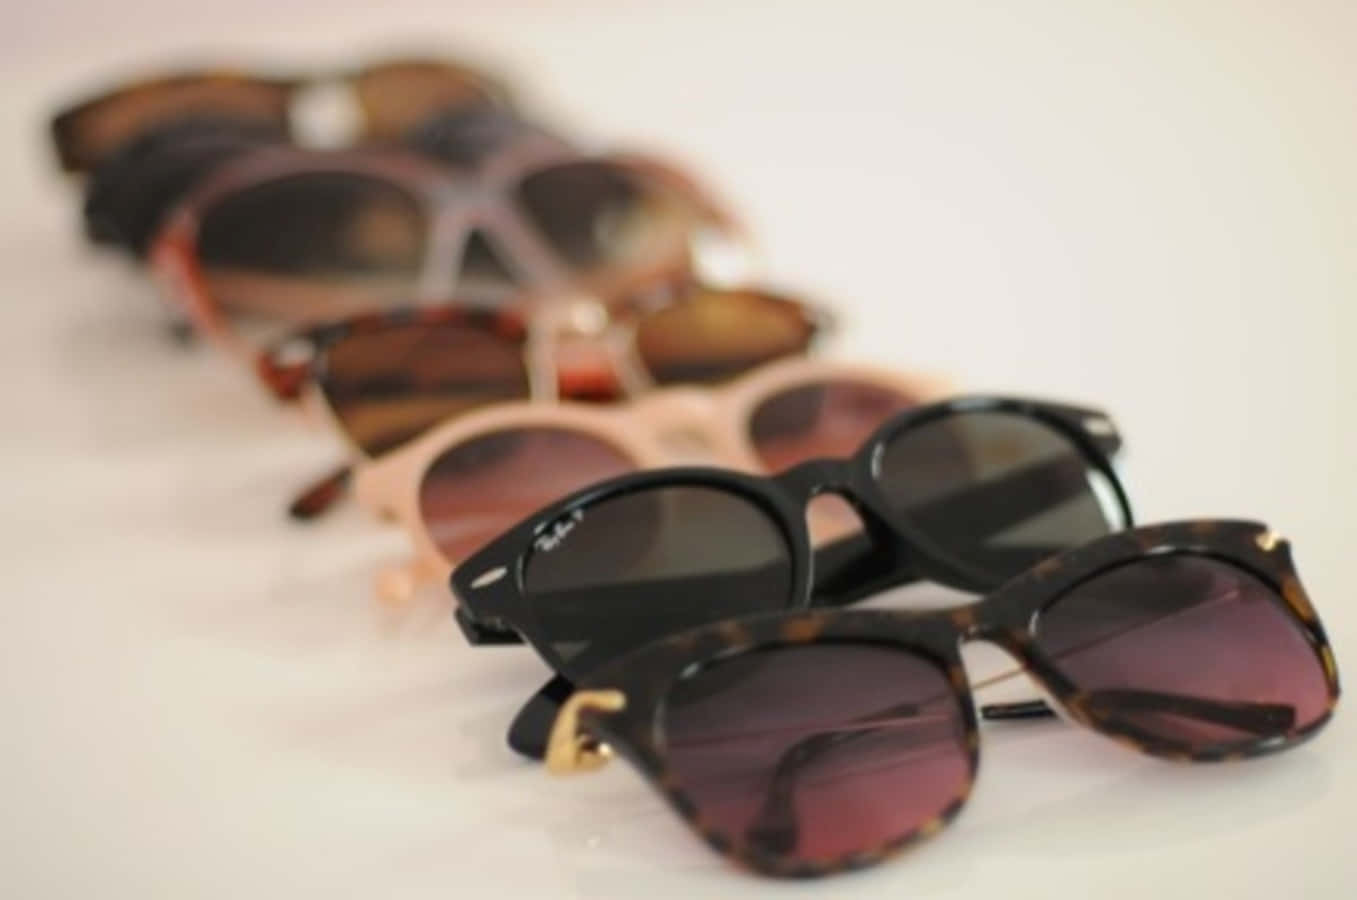 Express Your Unique Style With These Iconic Sunglasses